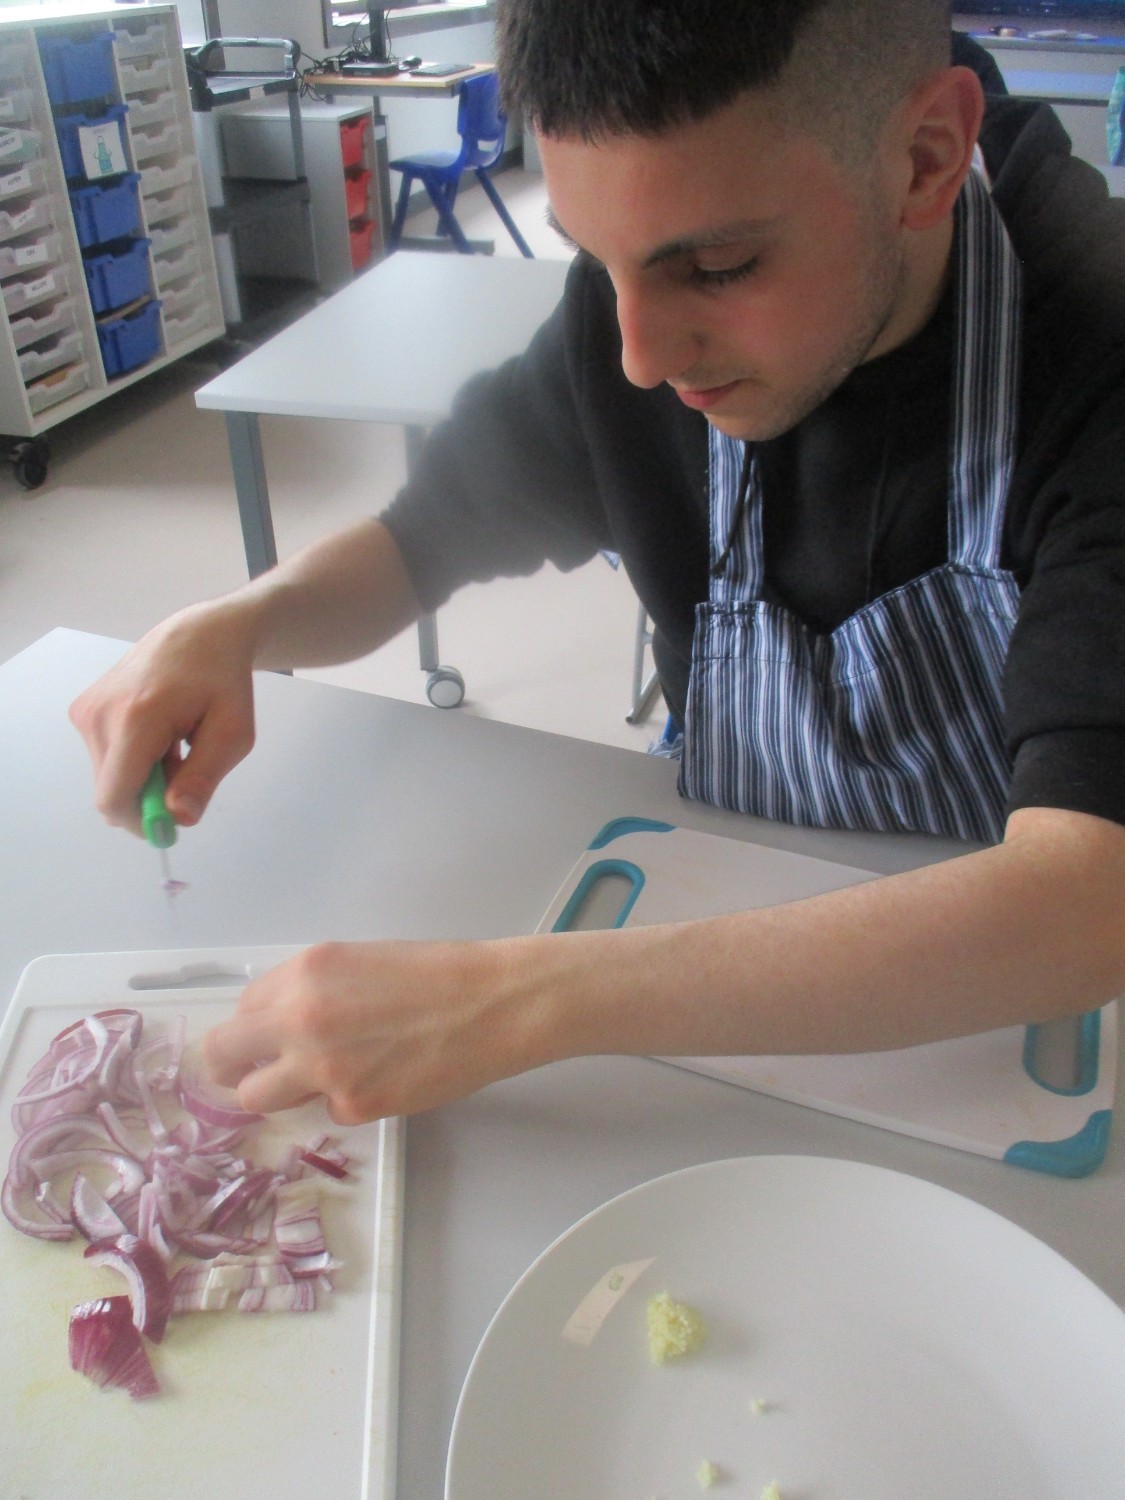 Toni is showing his Italian heritage with the garlic and onion preparations!